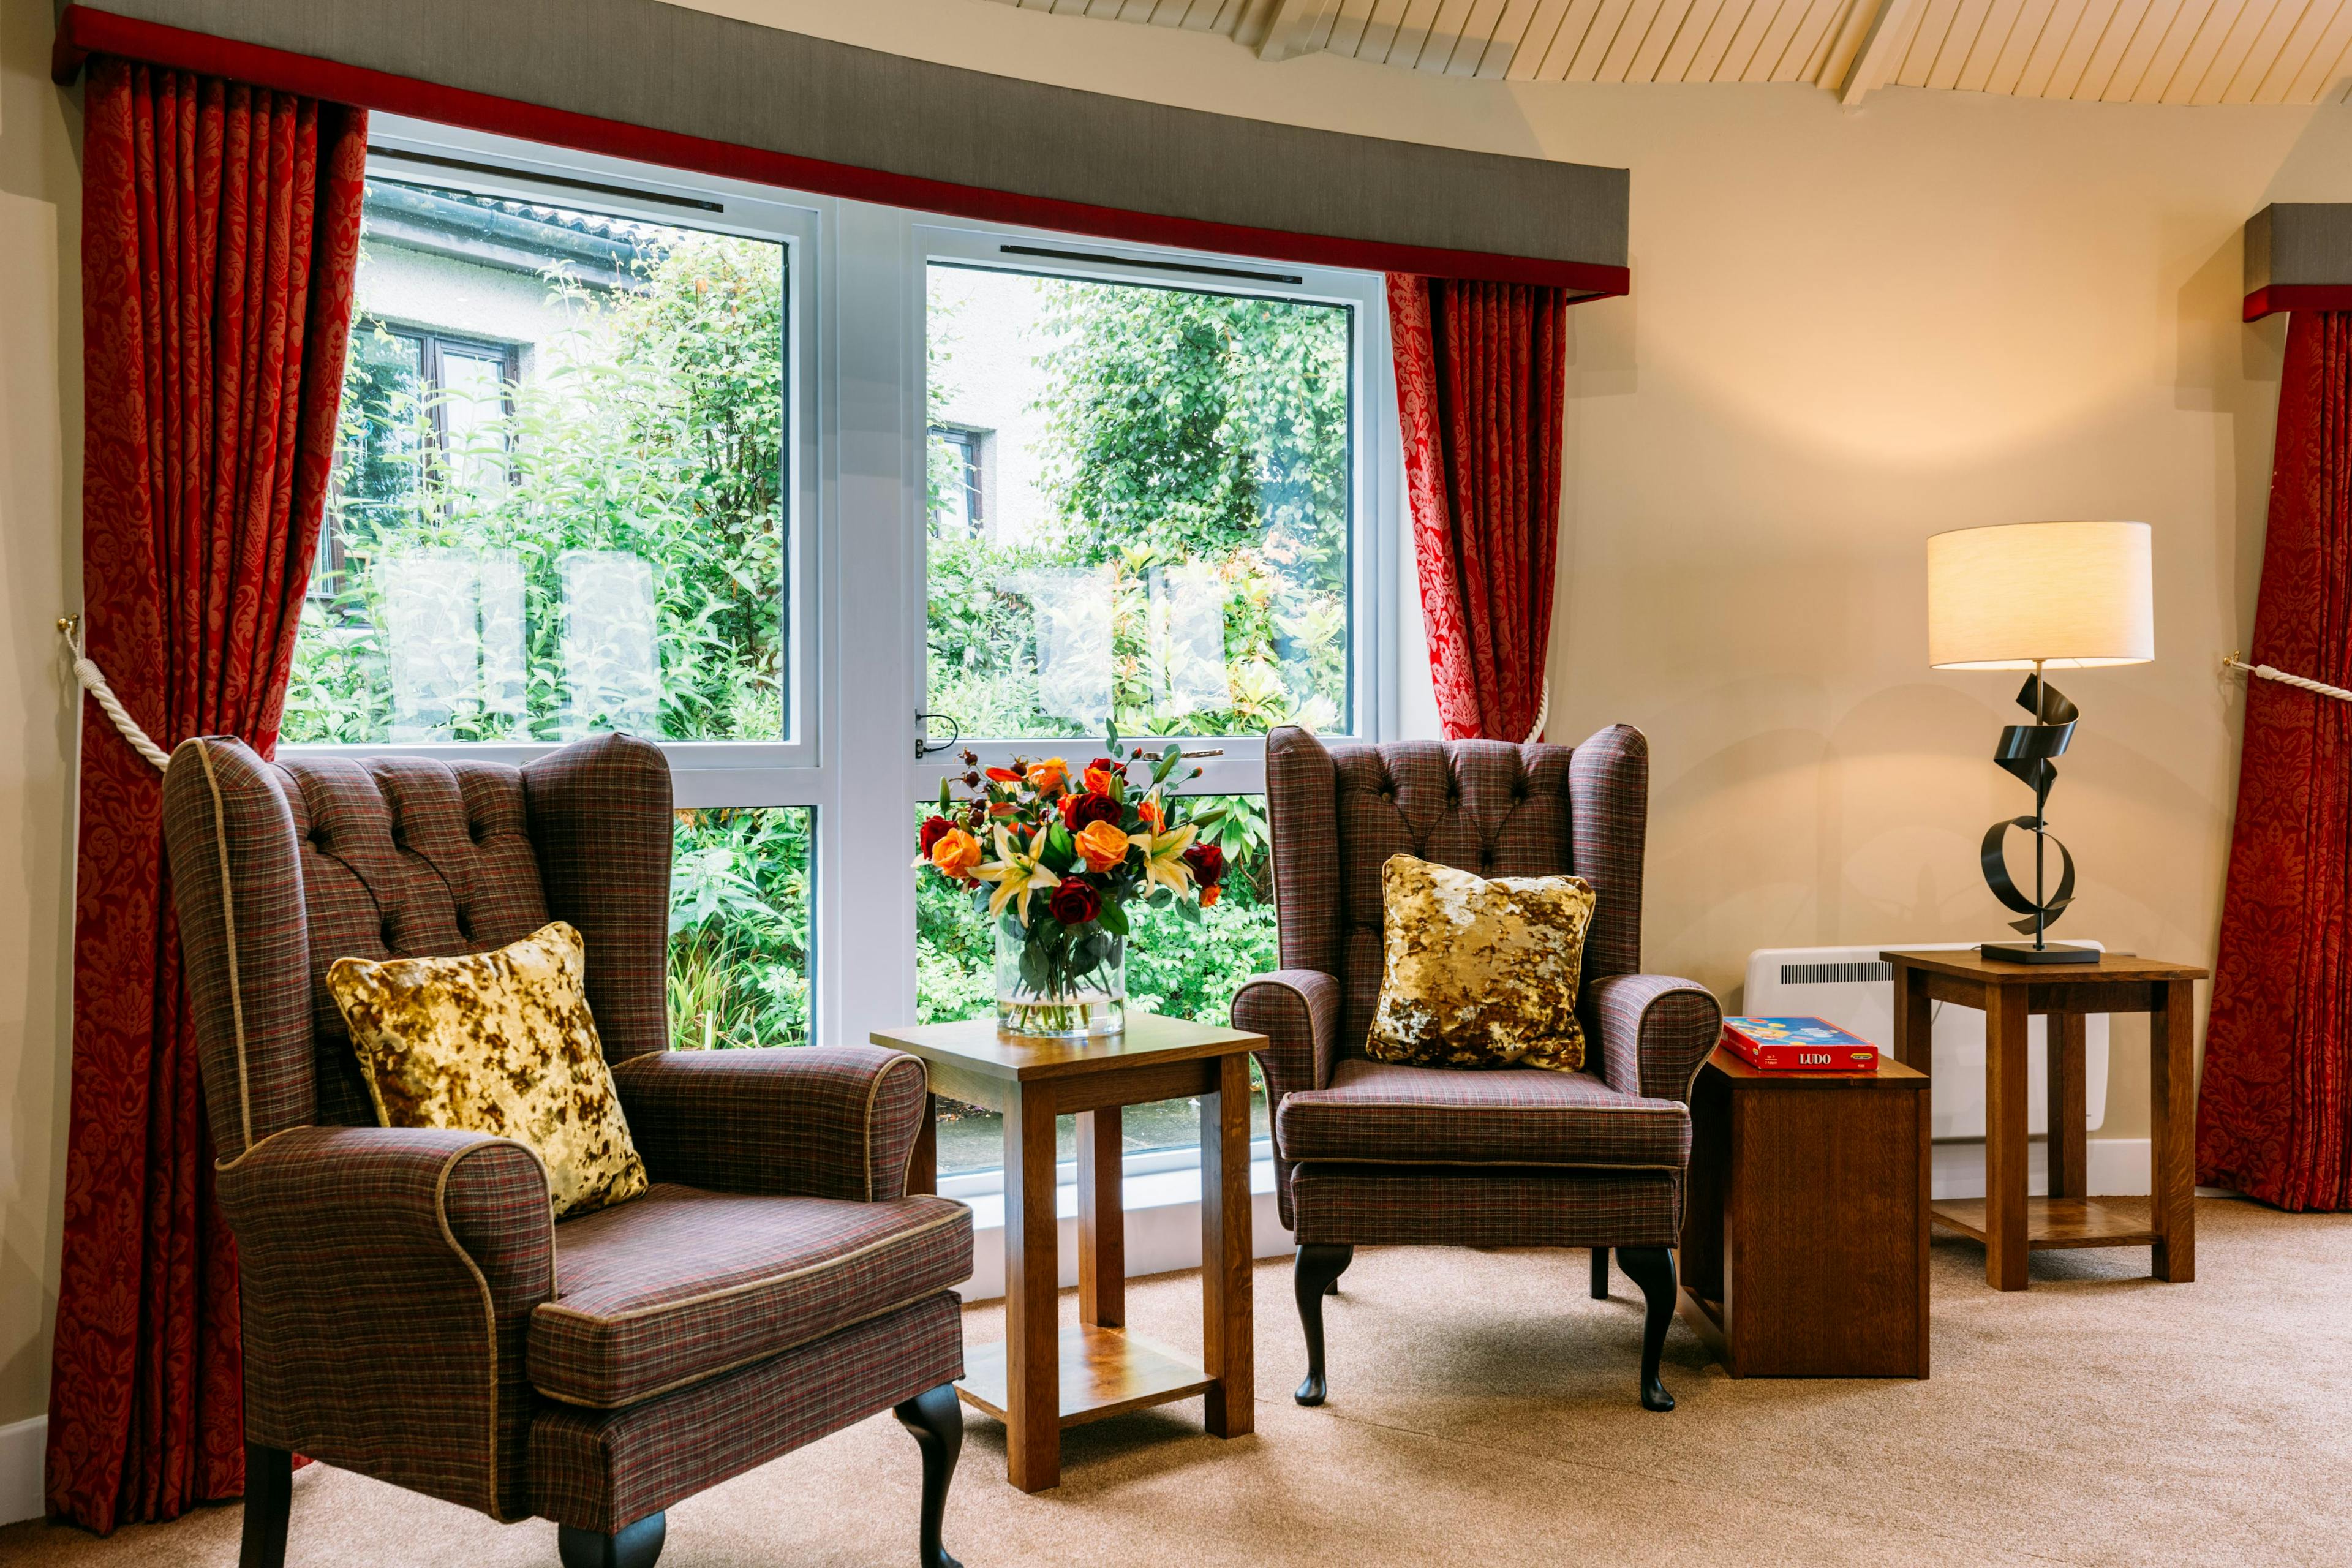 Communal Area at South Grange Care Home in The City of Dundee, Scotland